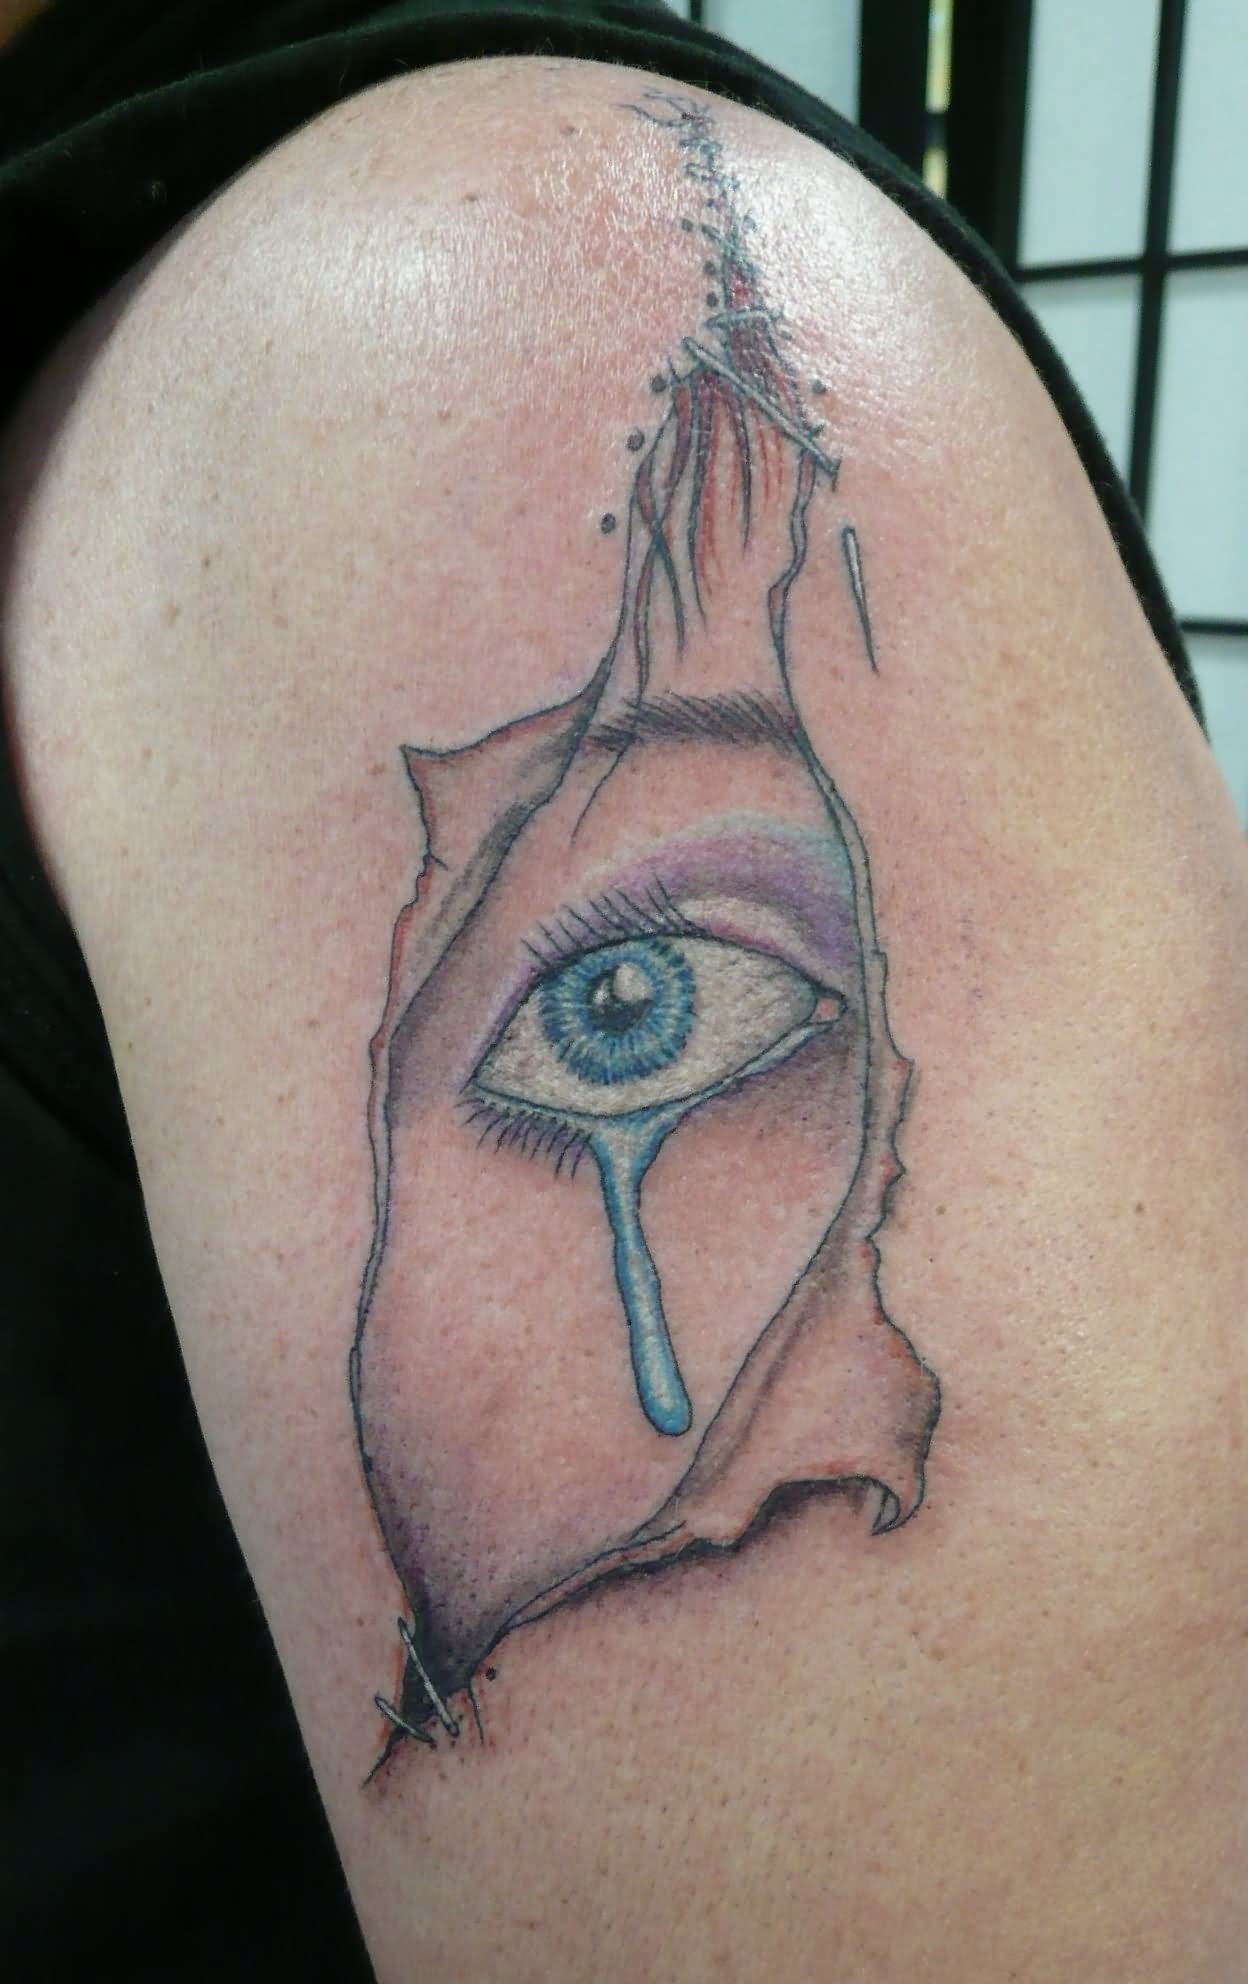 Ripped Skin Crying Eye Tattoo Design For Shoulder